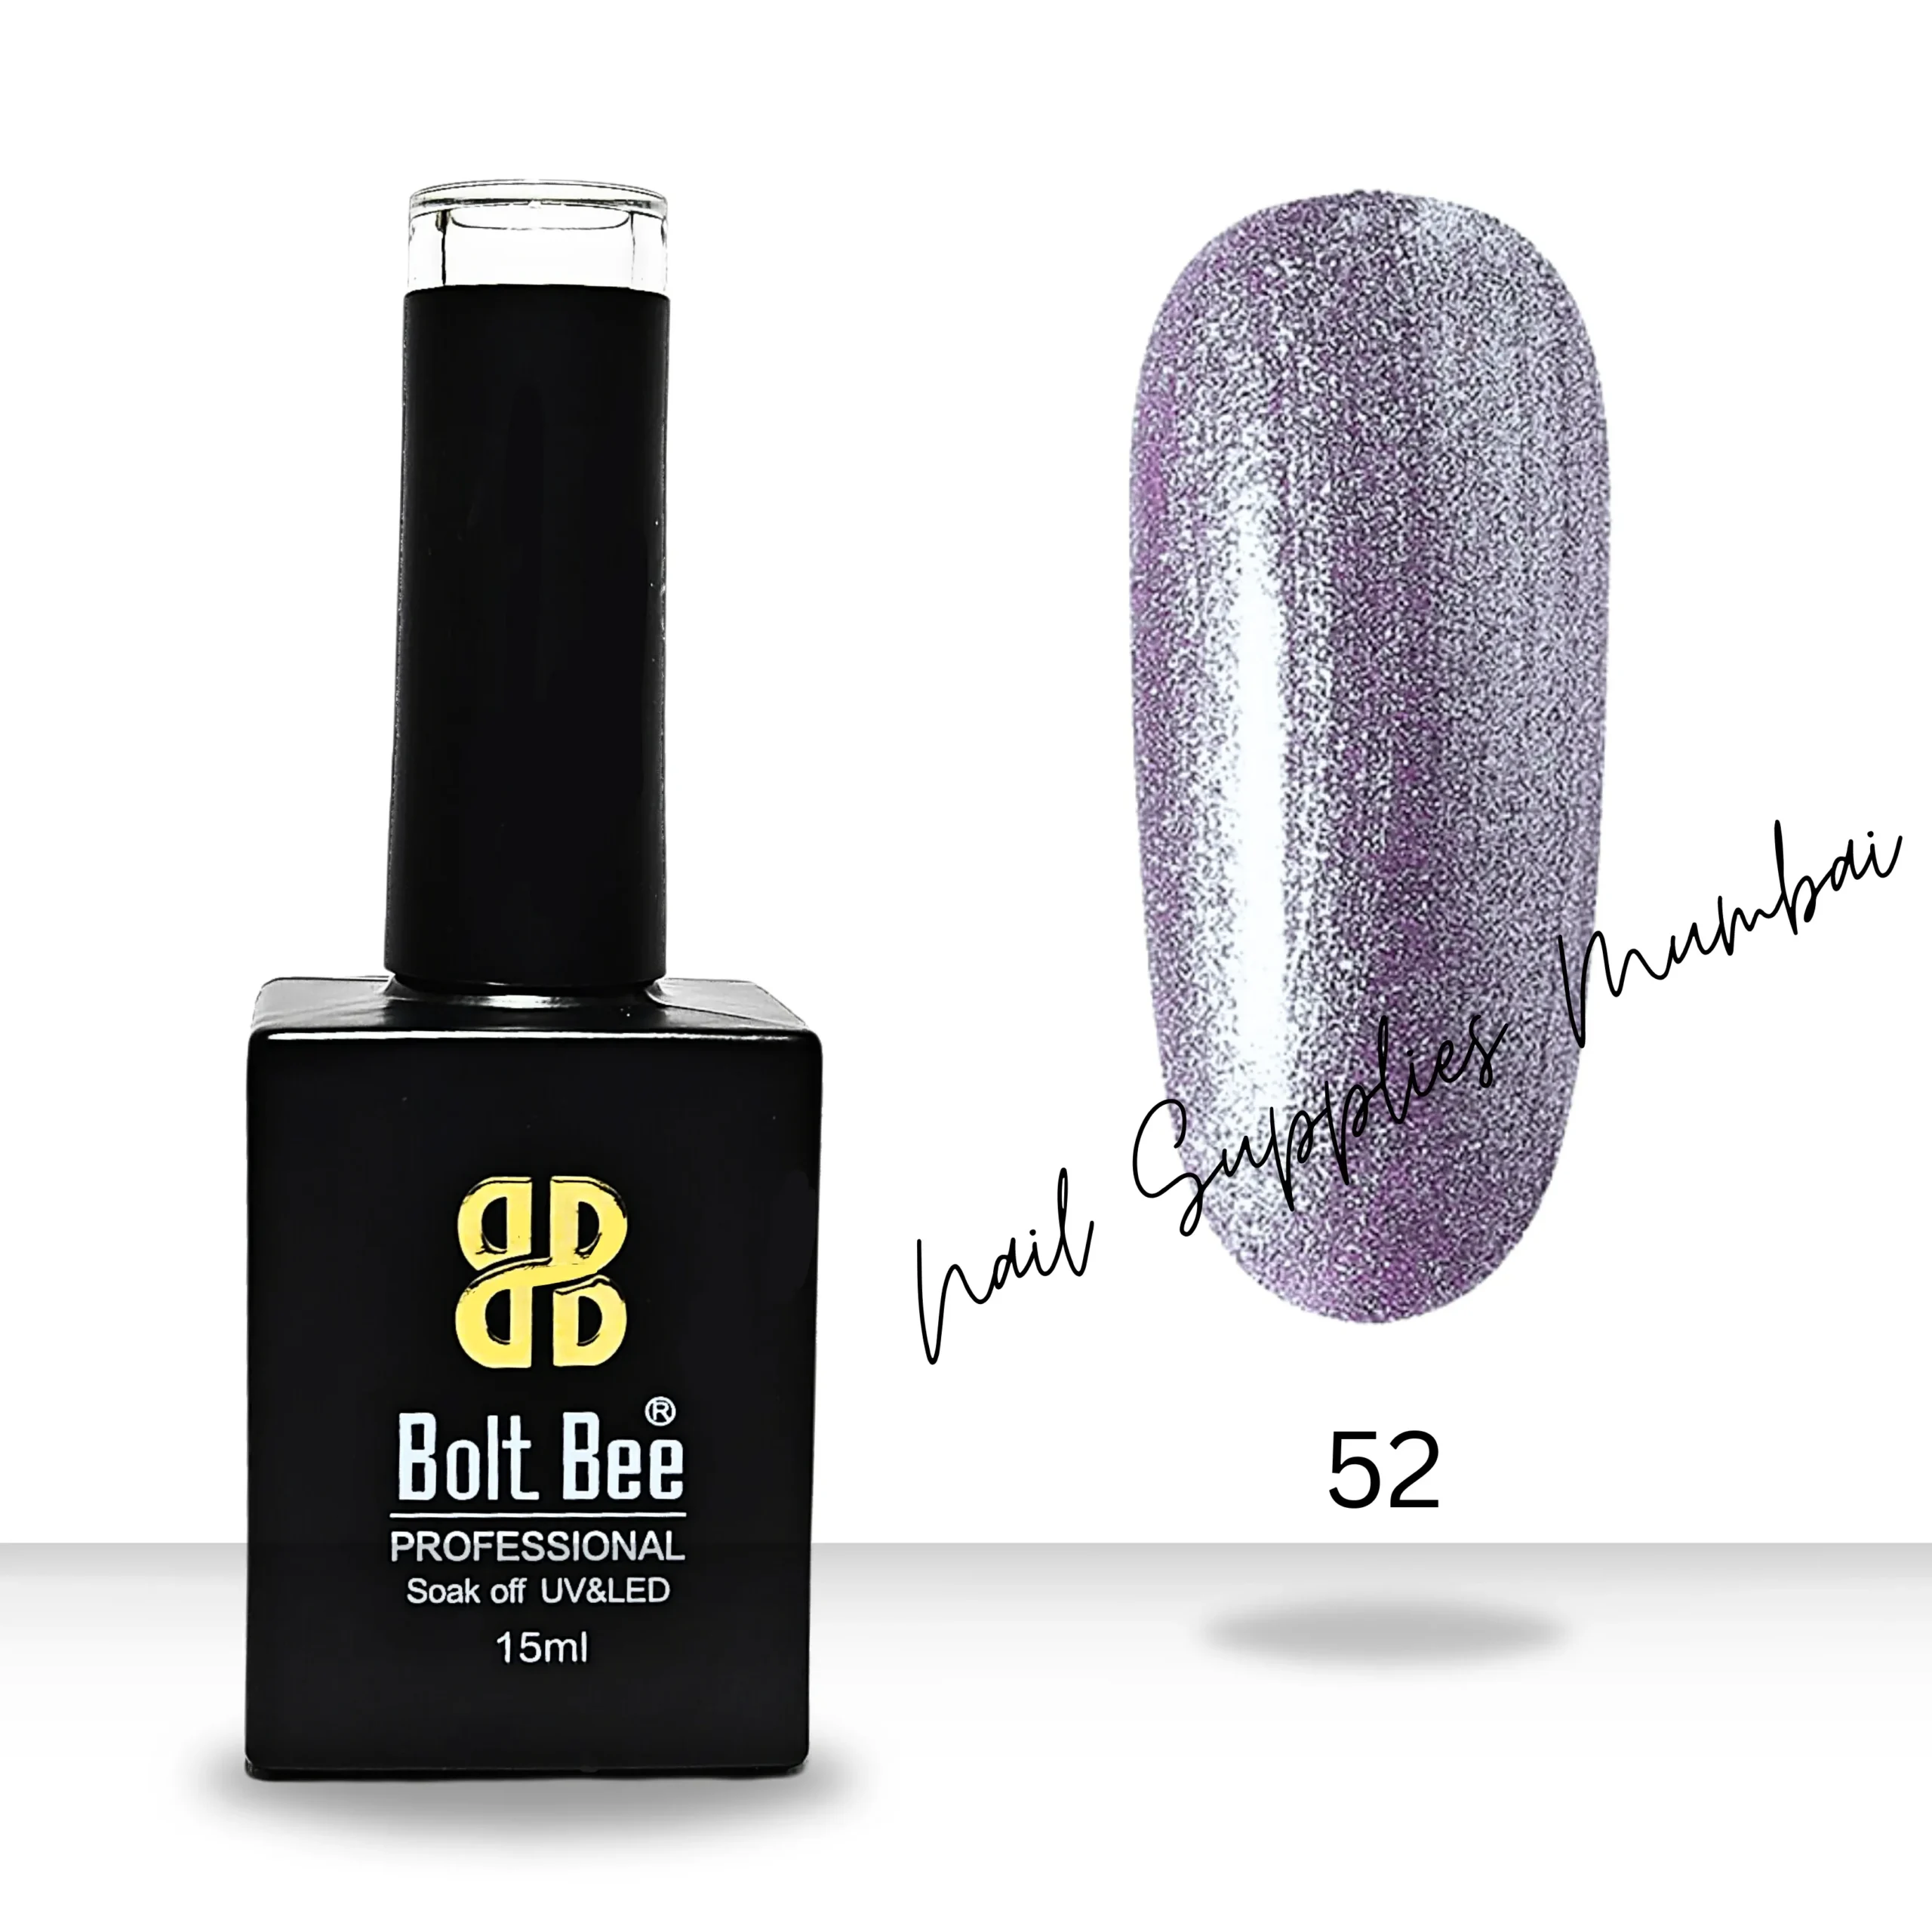 GULGLOW99 perfect best look glossy nail polish lavender - Price in India,  Buy GULGLOW99 perfect best look glossy nail polish lavender Online In  India, Reviews, Ratings & Features | Flipkart.com